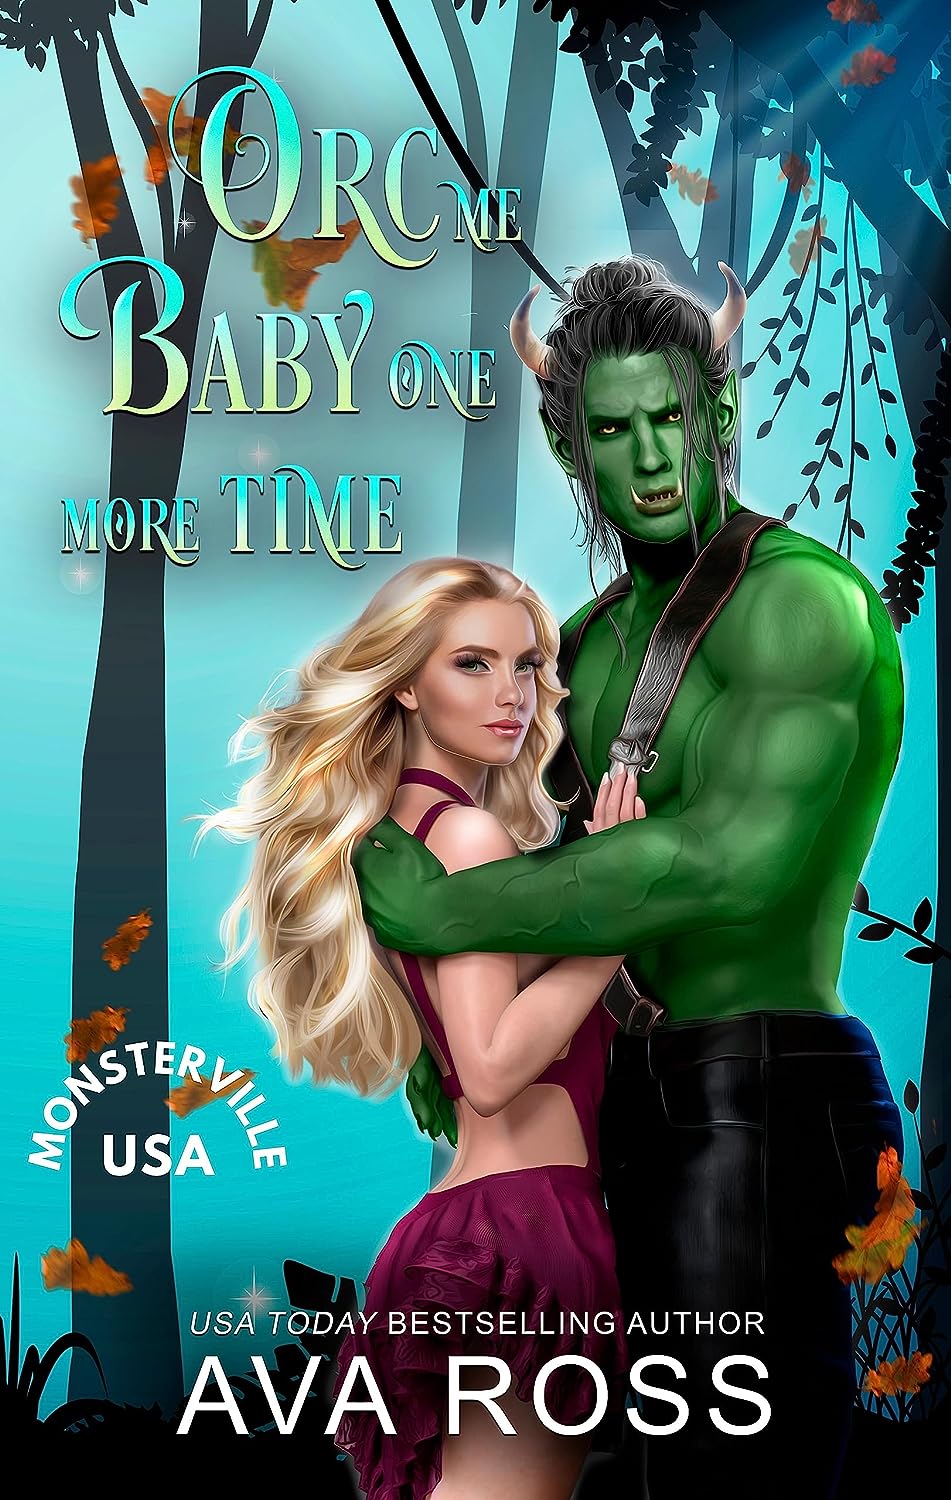 Orc Me Baby One More Time by Ava Ross